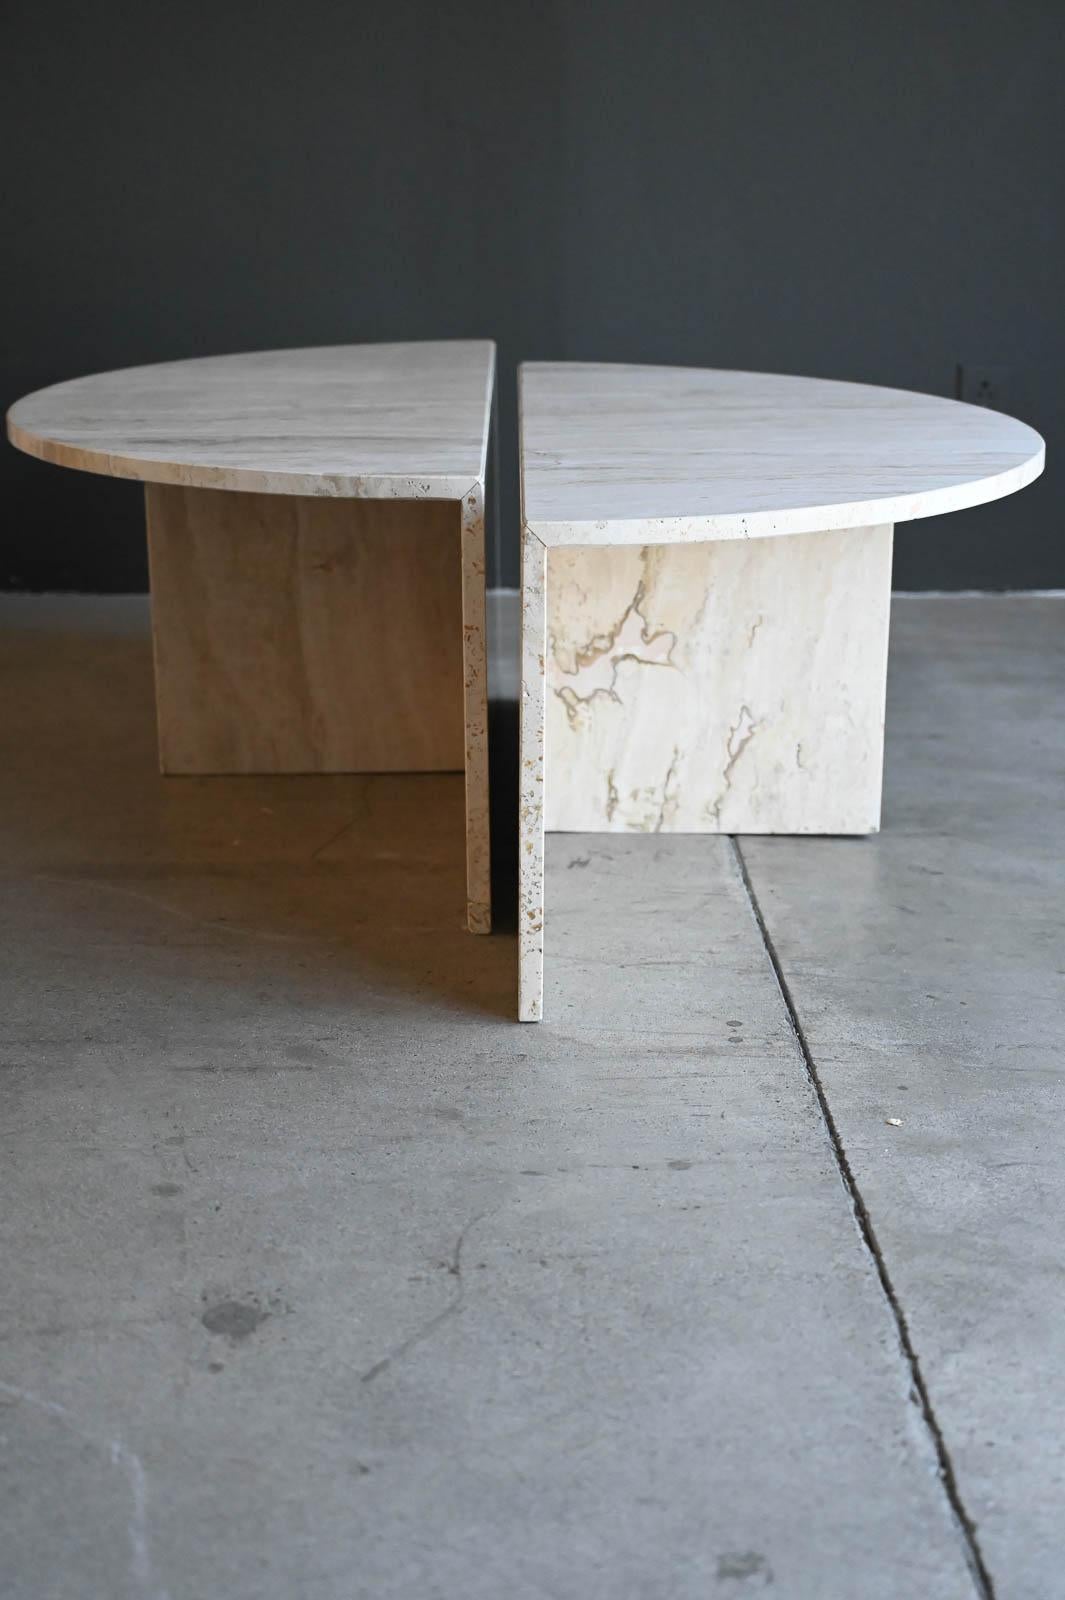 Late 20th Century Two Piece Round Travertine Coffee Table Set by Up & Up, ca. 1970